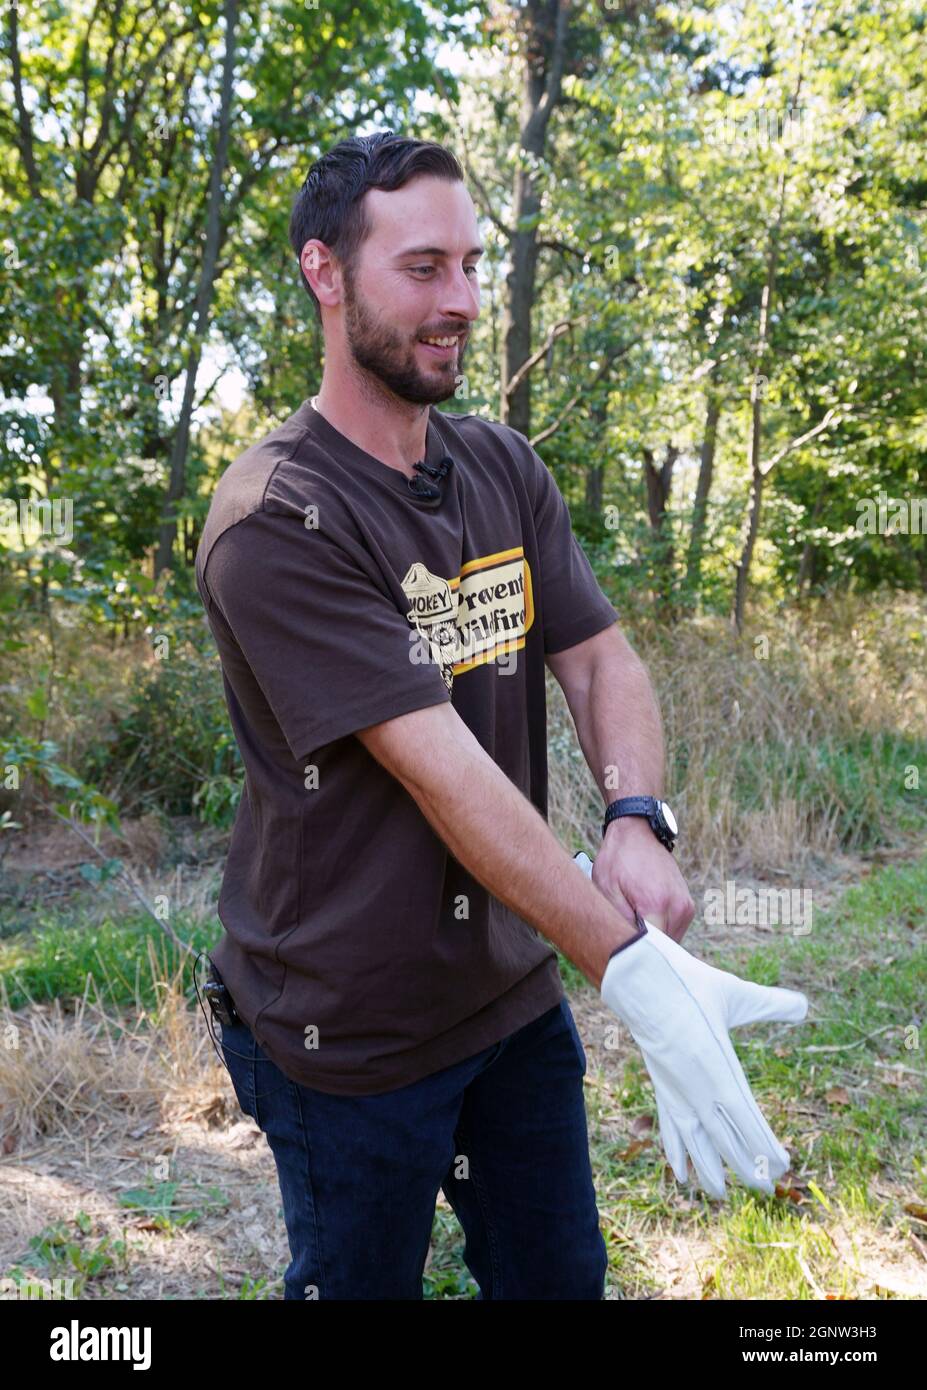 St. Louis, United States. 27th Sep, 2021. St. Louis Cardinals shortstop Paul DeJong puts on gloves as he prepares to plant a tree in Forest Park in St. Louis on Monday, September 27, 2021. DeJong has partnered with Players for the Planet and One Tree Planted to support reforestation efforts in Forest Park. The Cardinals infielder donated $5,000 to fund the planting of over 200 trees in a section of Forest Park's Nature Reserve Successional Forest site. Photo by Bill Greenblatt/UPI Credit: UPI/Alamy Live News Stock Photo